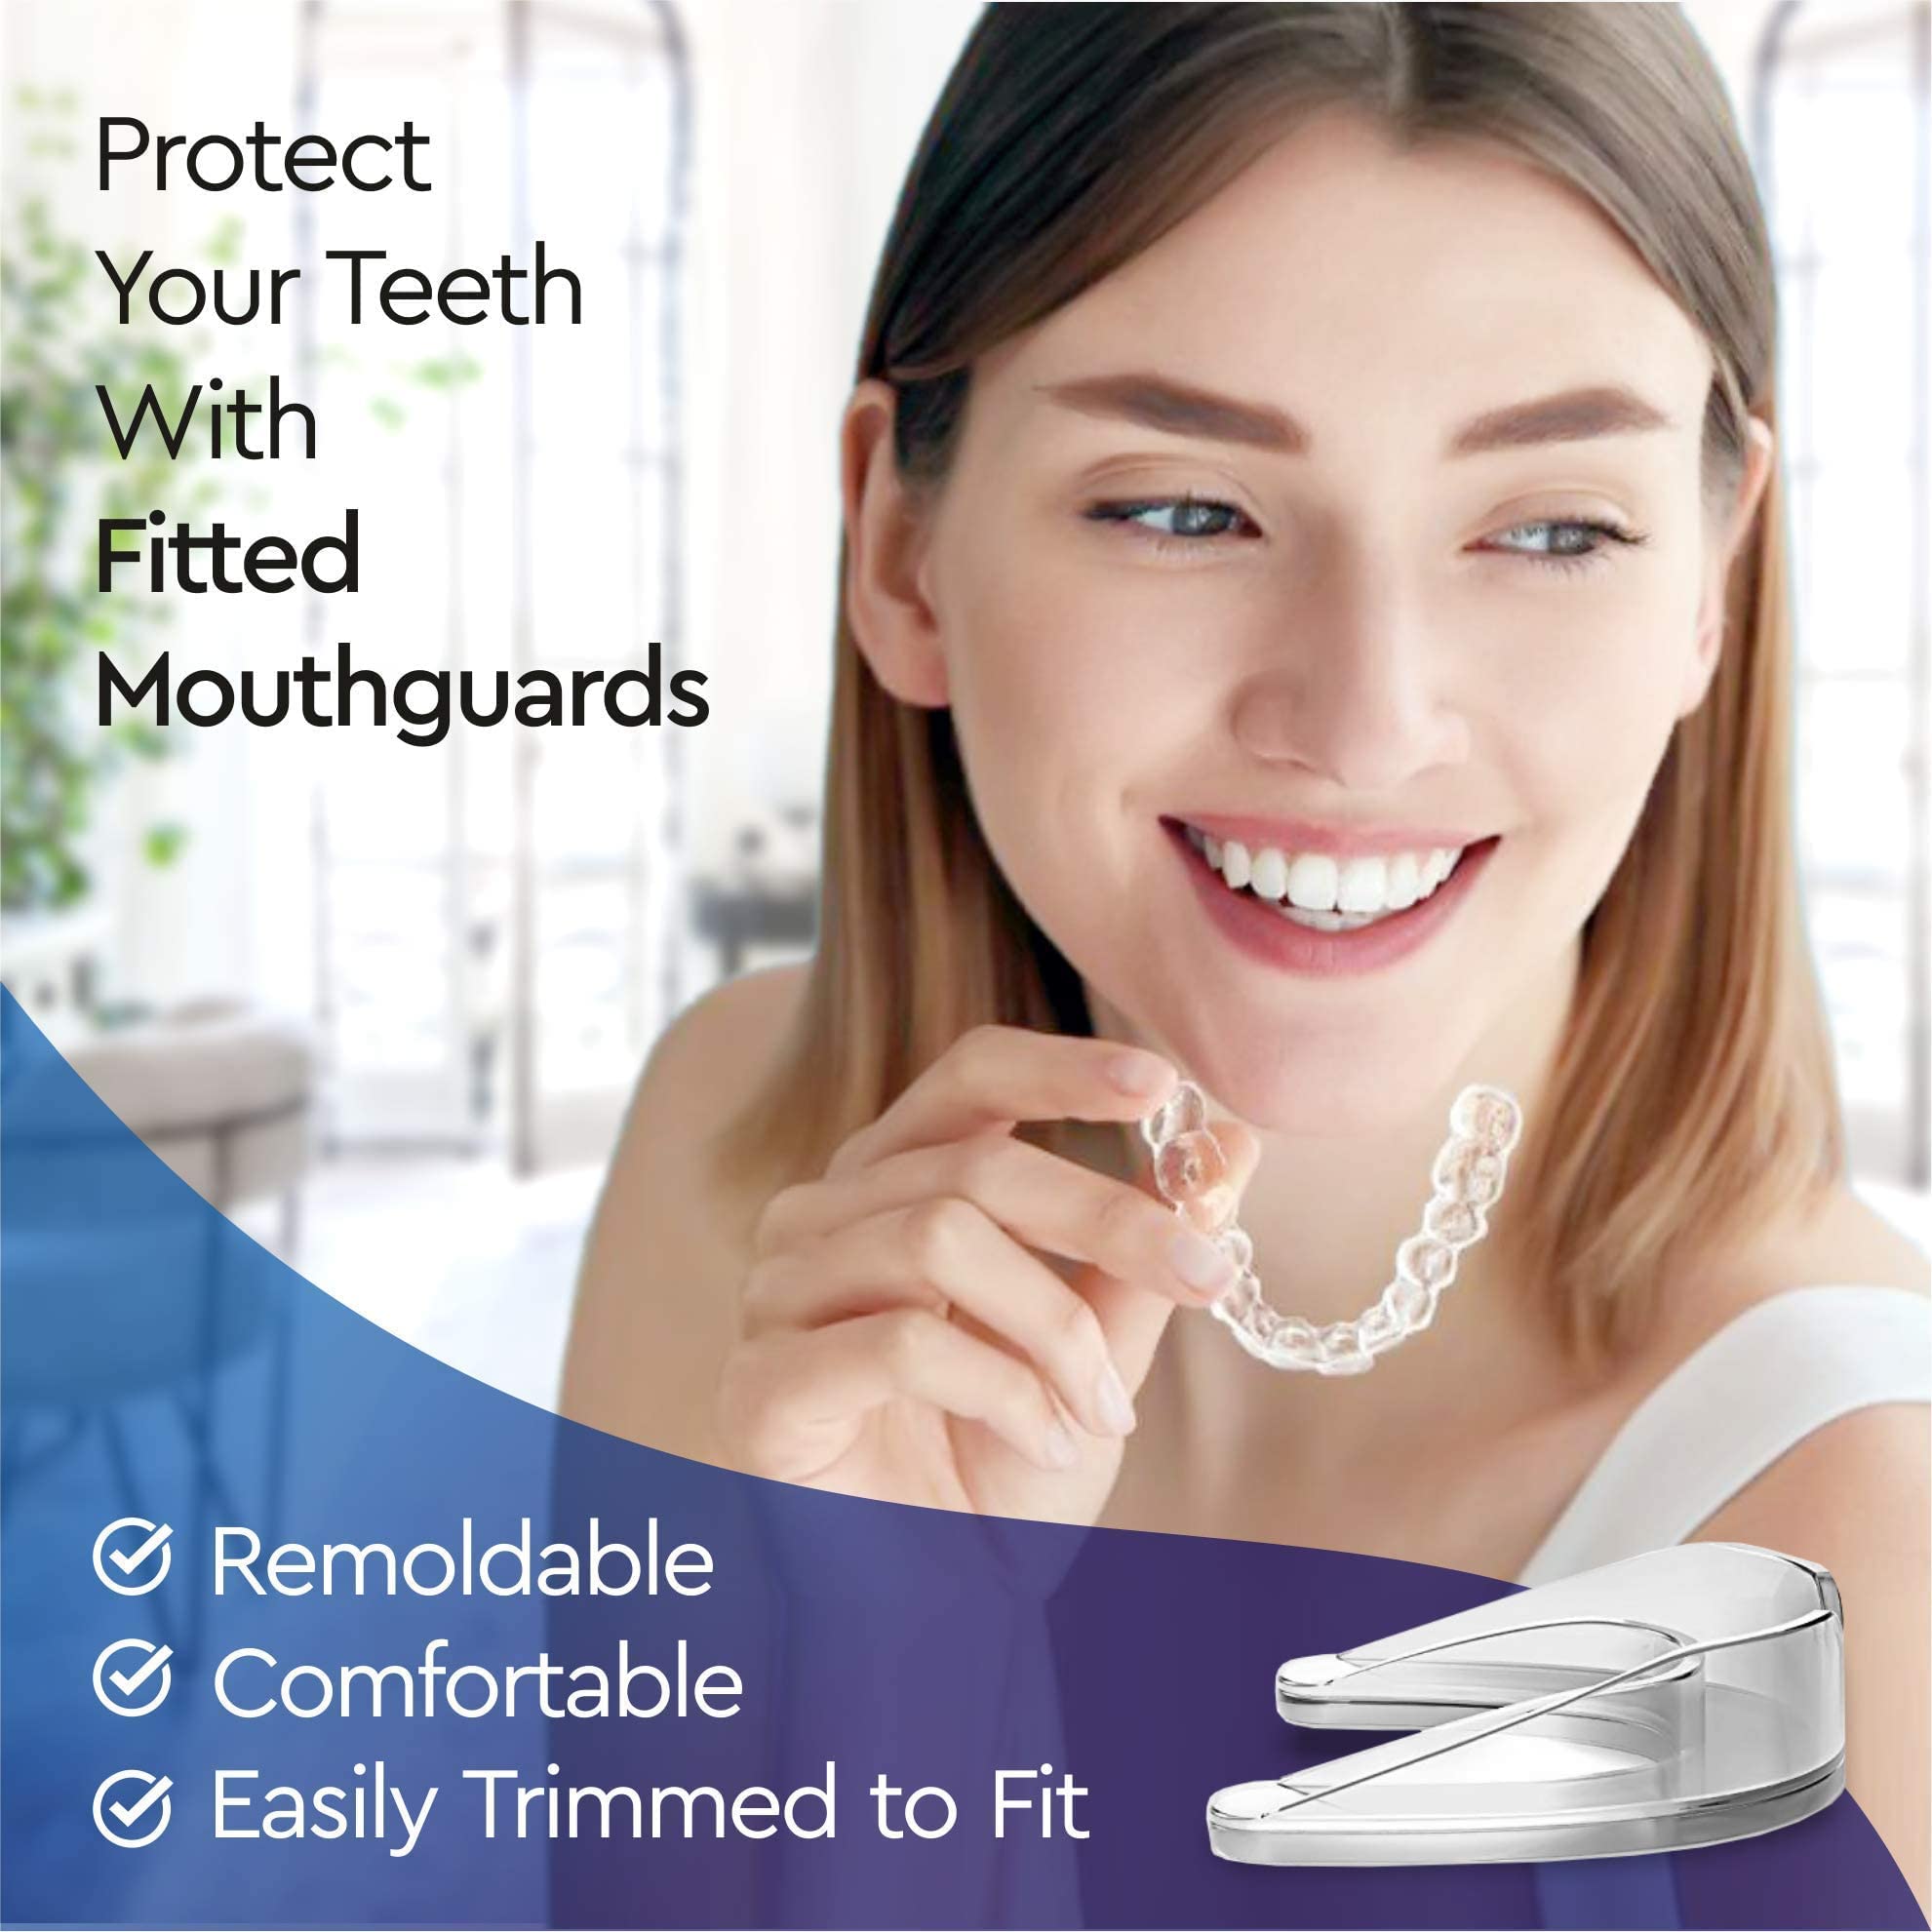 Professional Mouth Guard for Grinding Teeth - 2 Sizes 4 Pieces Mouthguard, Moldable Night Guards for Teeth Grinding, Night Guard for Bruxism & Teeth Clenching - Dental Guard Case